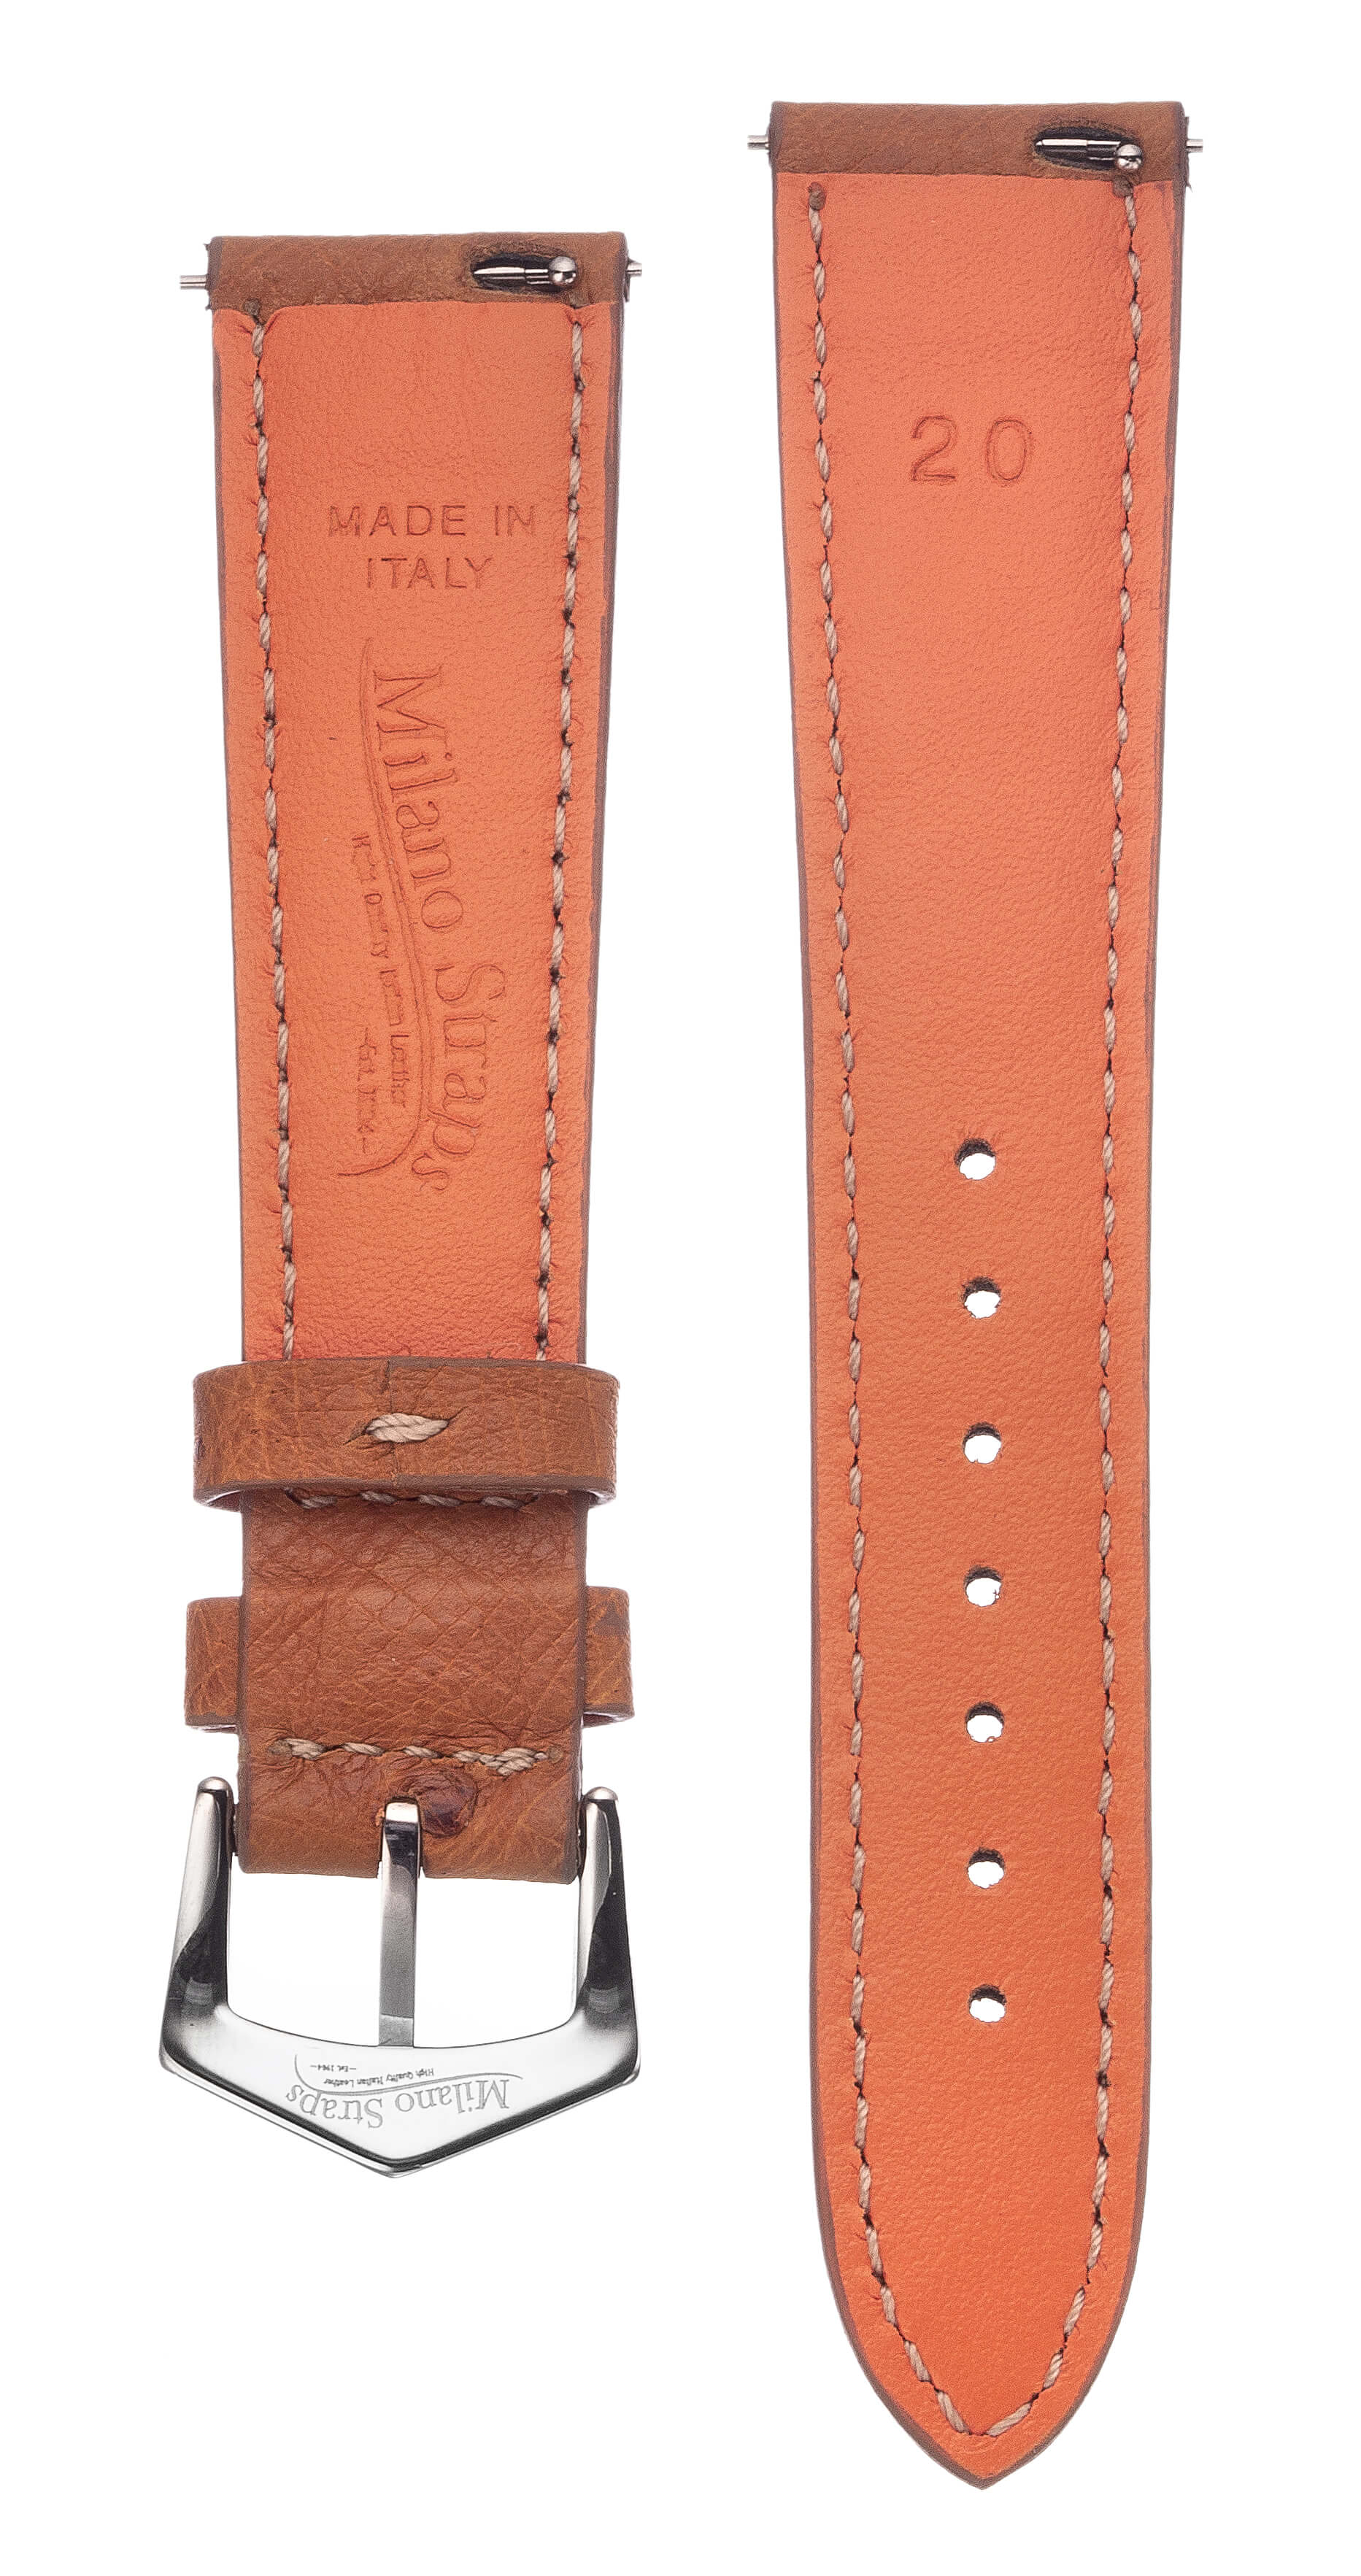 Apple Watch Leather Band ™ Cognac Ostrich Leather Straps - Milano Straps